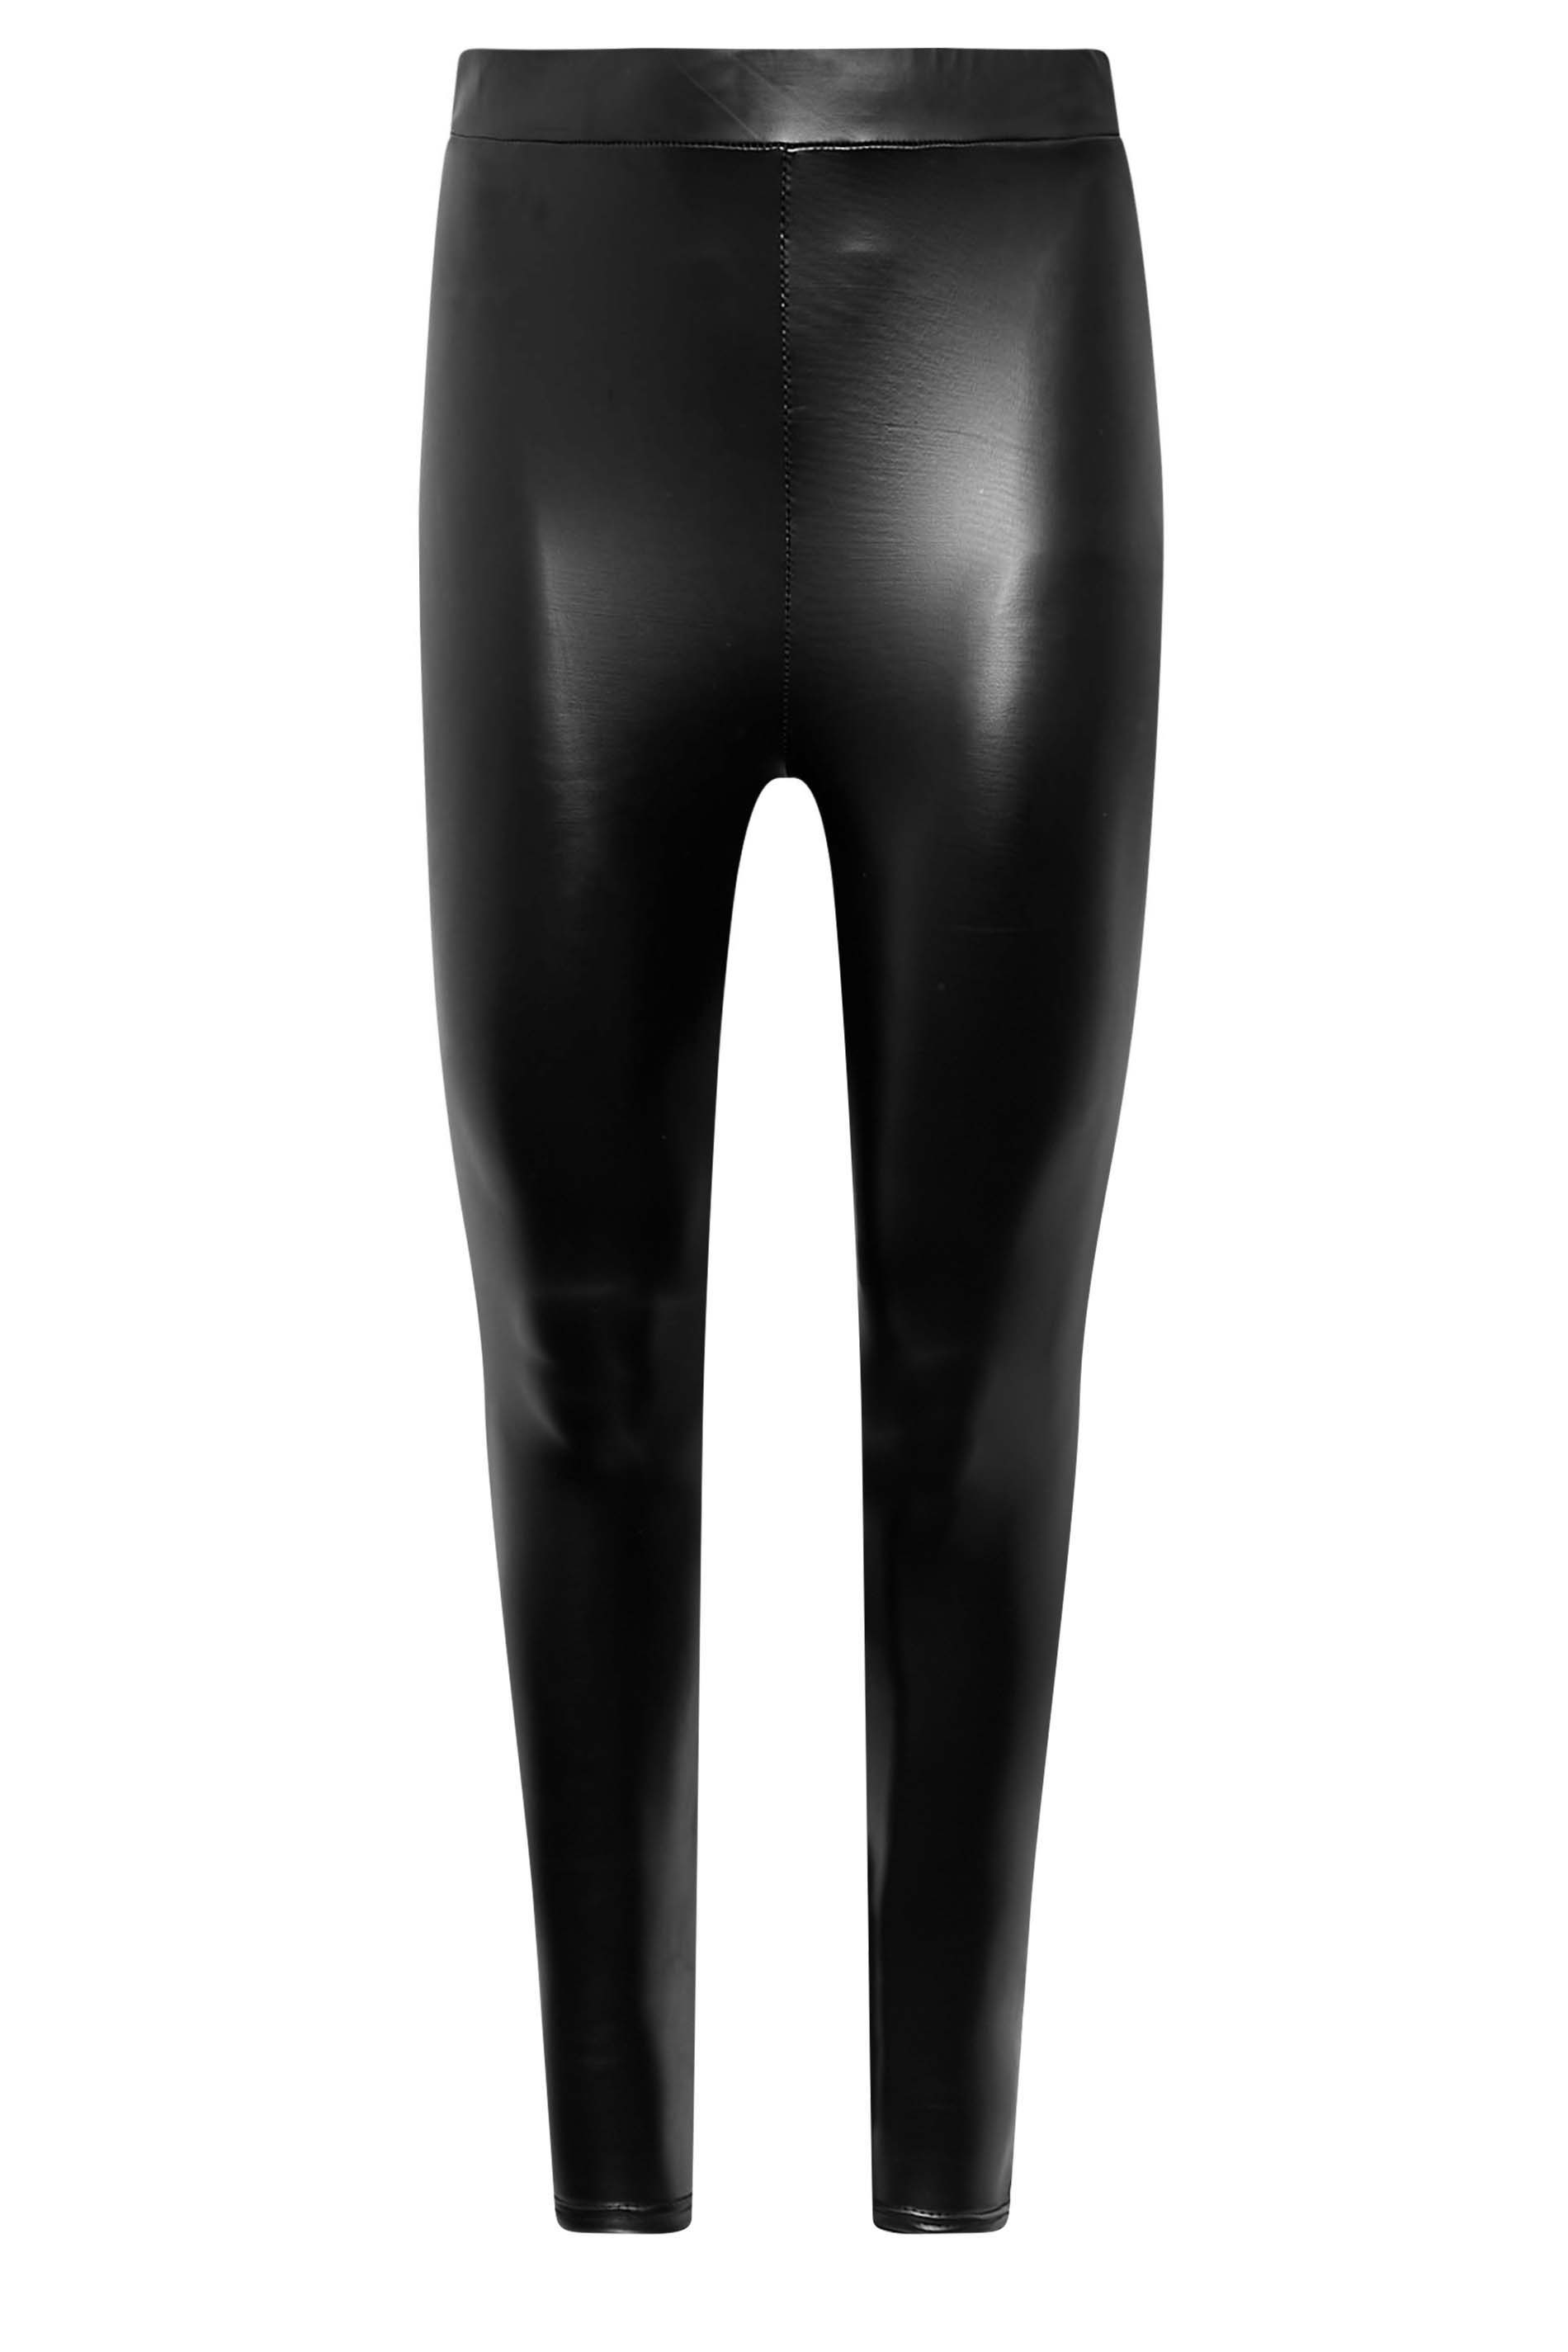 YOURS PETITE Plus Size Black Stretch Leather Look Leggings